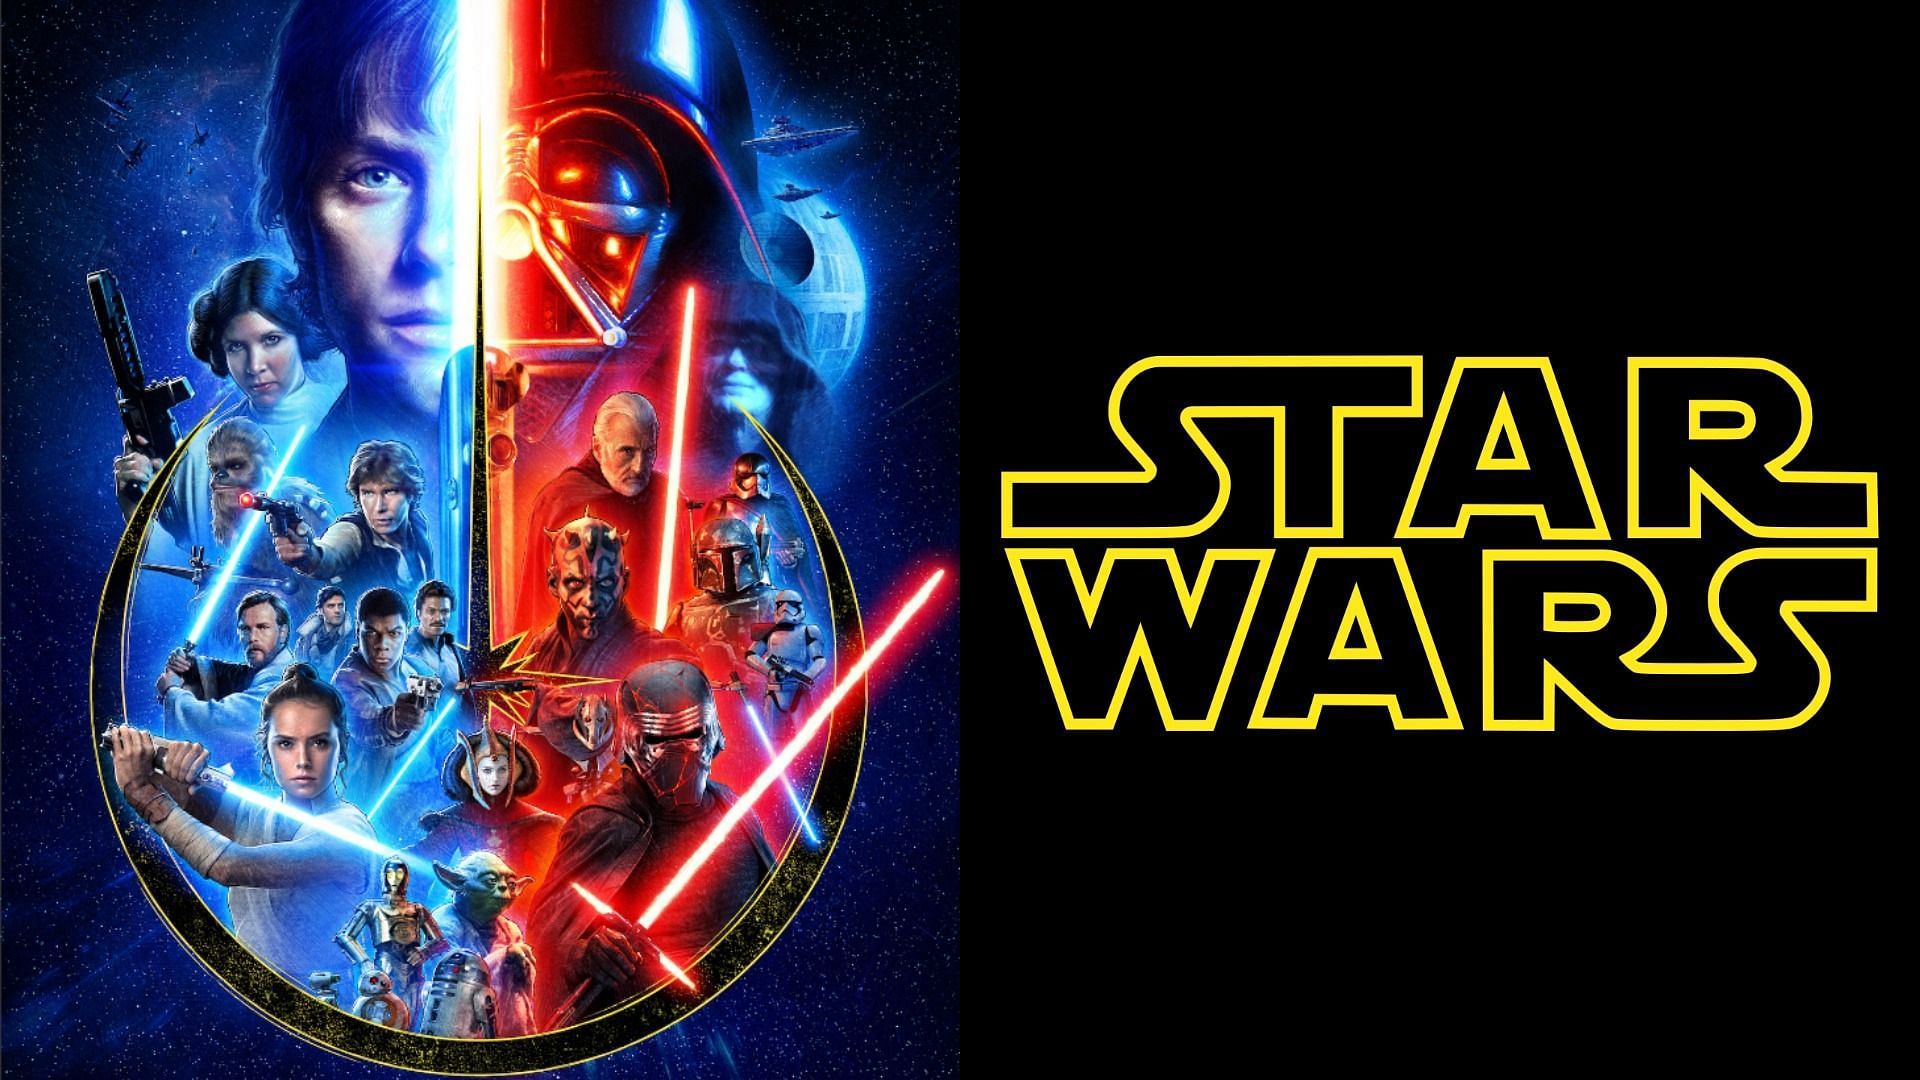 Star Wars is one of the biggest franchises out there (Images via Disney/Lucasfilm)